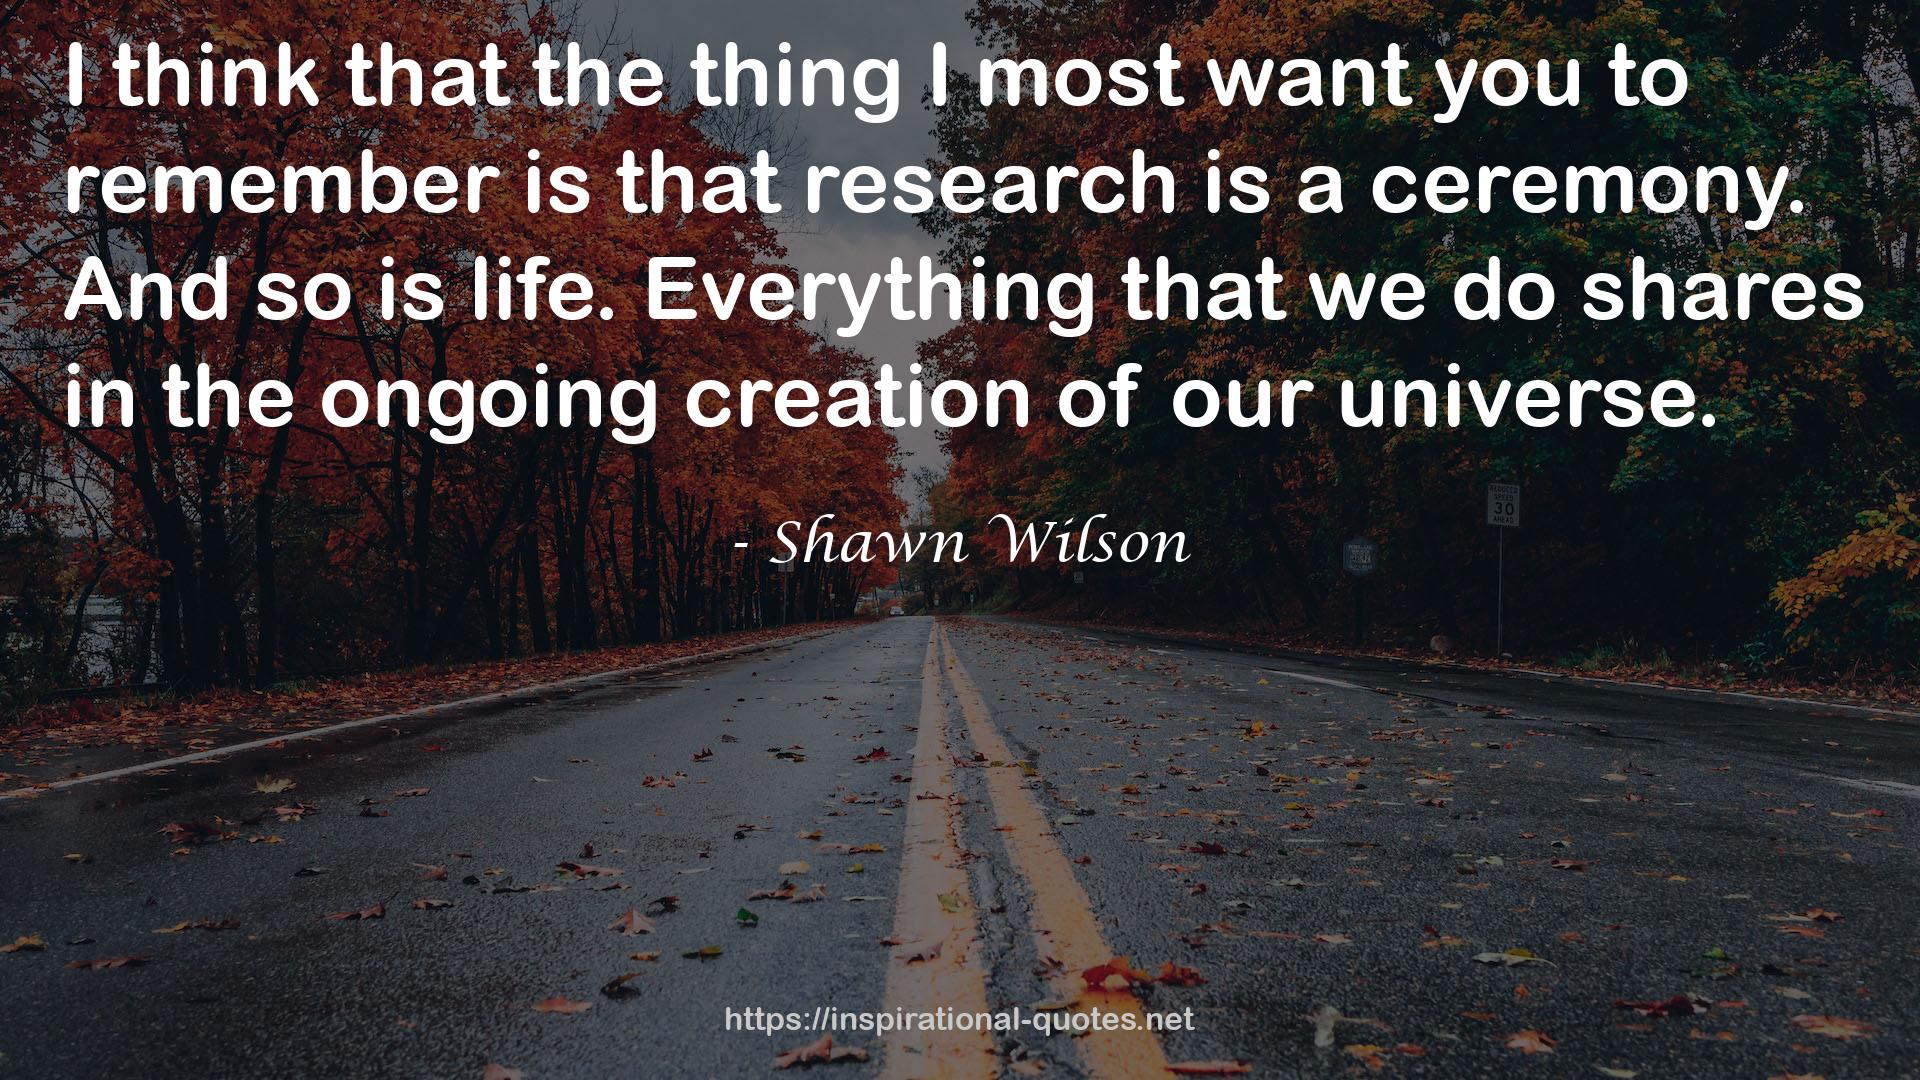 Shawn Wilson QUOTES